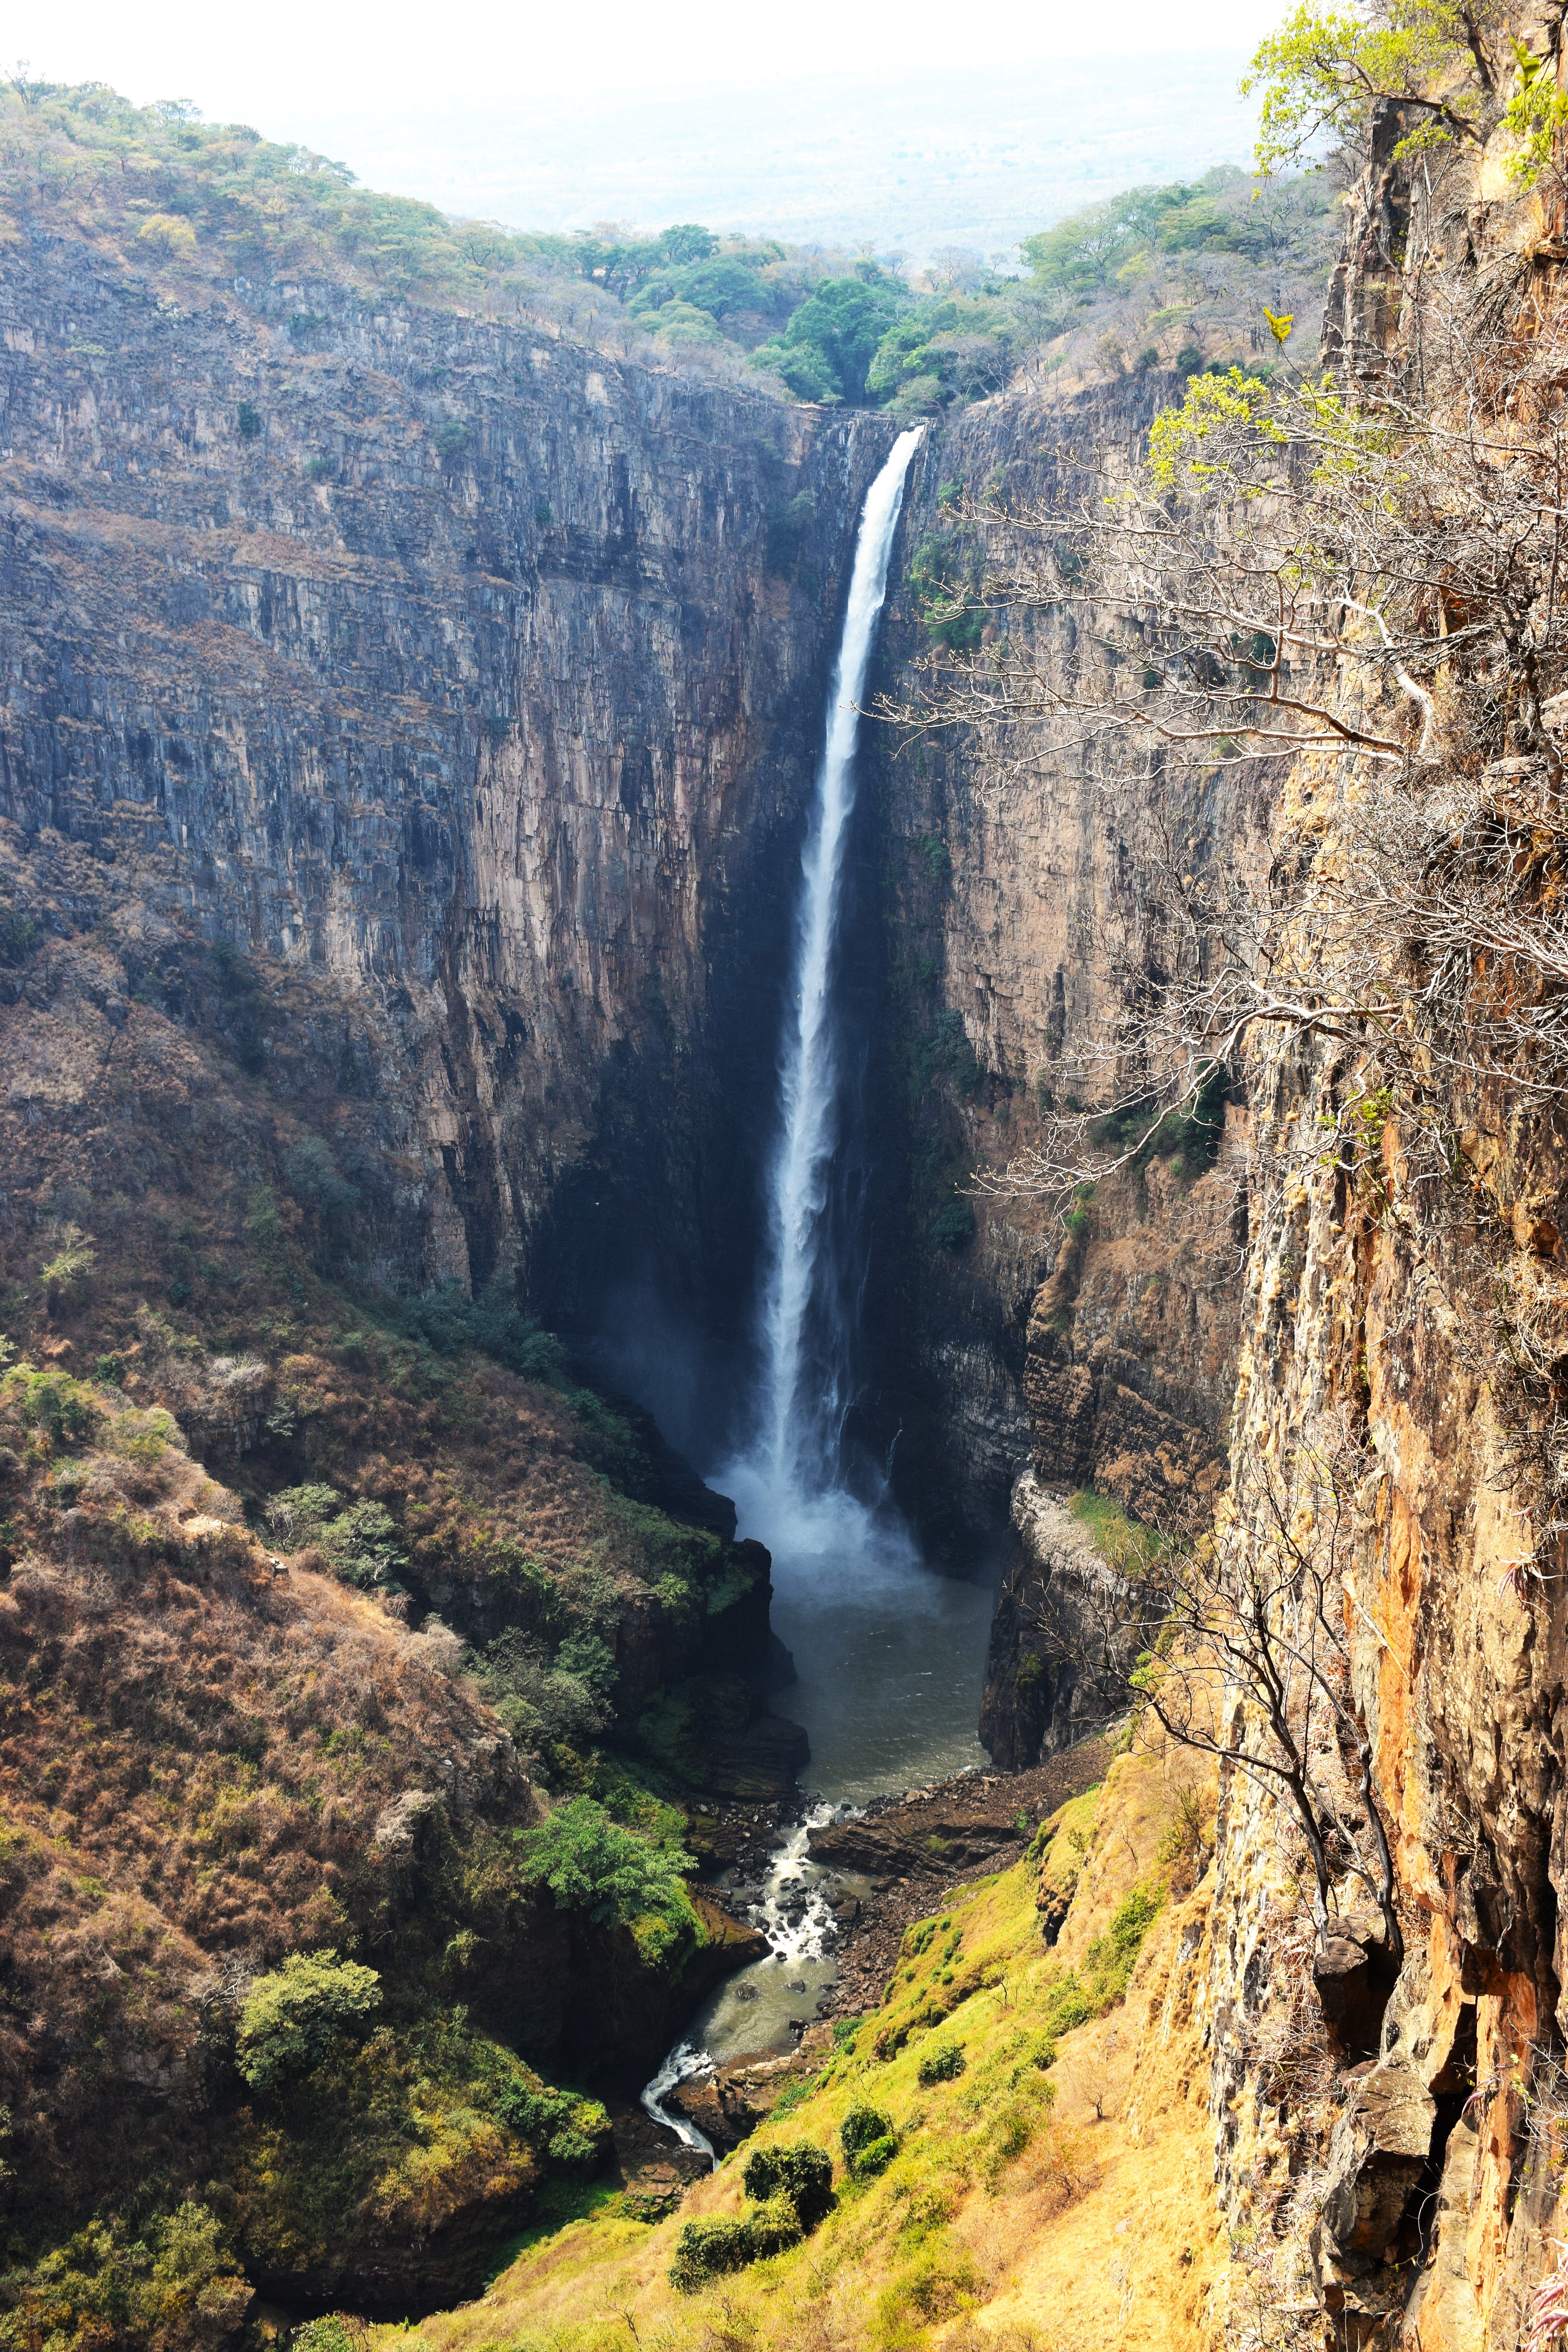 The 250 metre high Kalambo falls on the Zambia/Tanzania border were part of a remarkable area of prehistoric activity